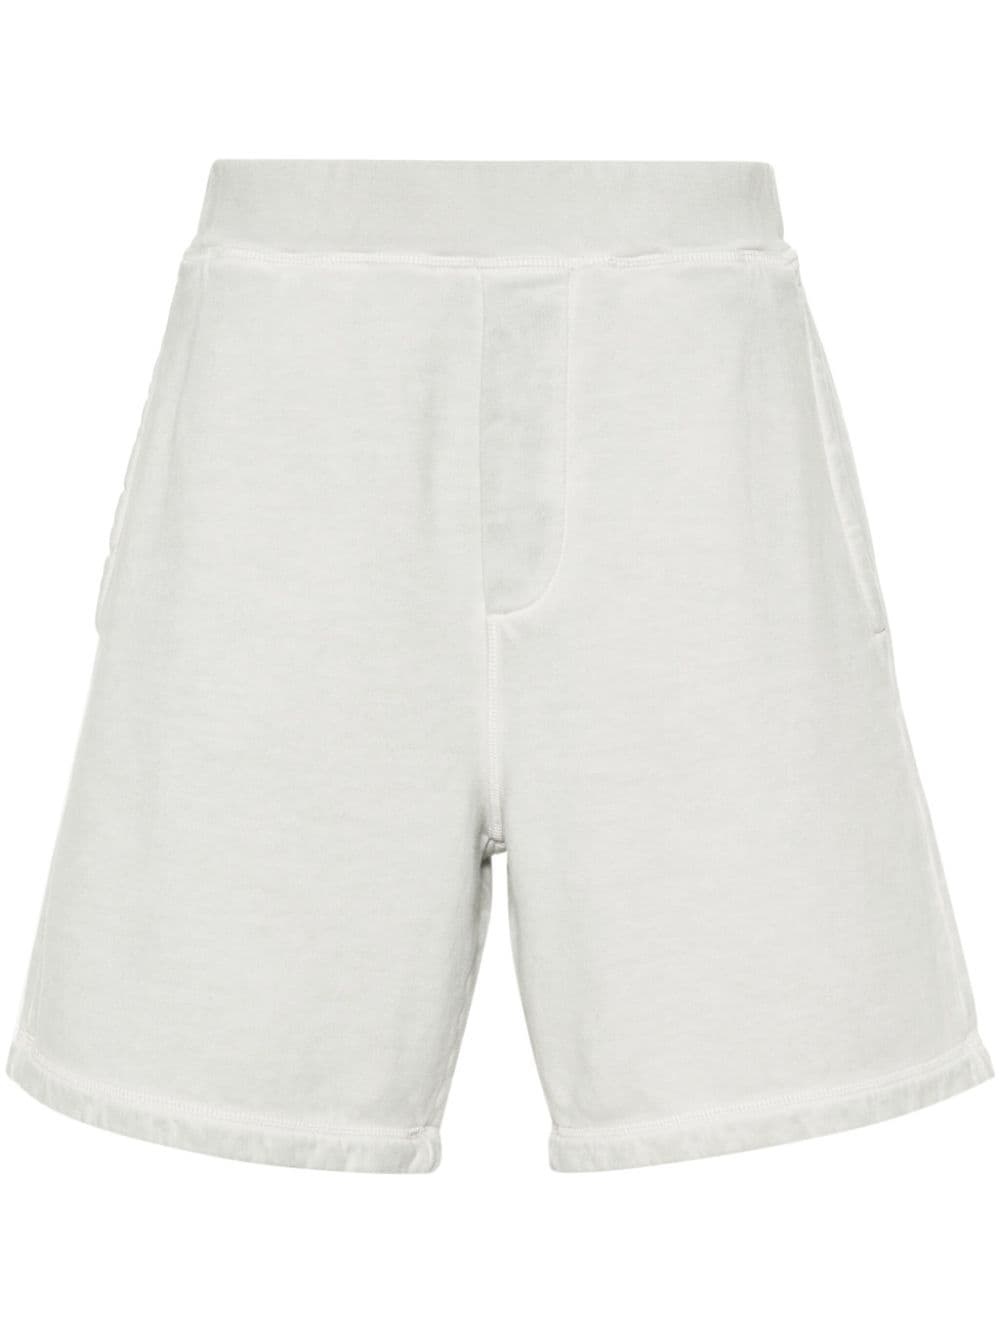 faded-effect cotton shorts - 1